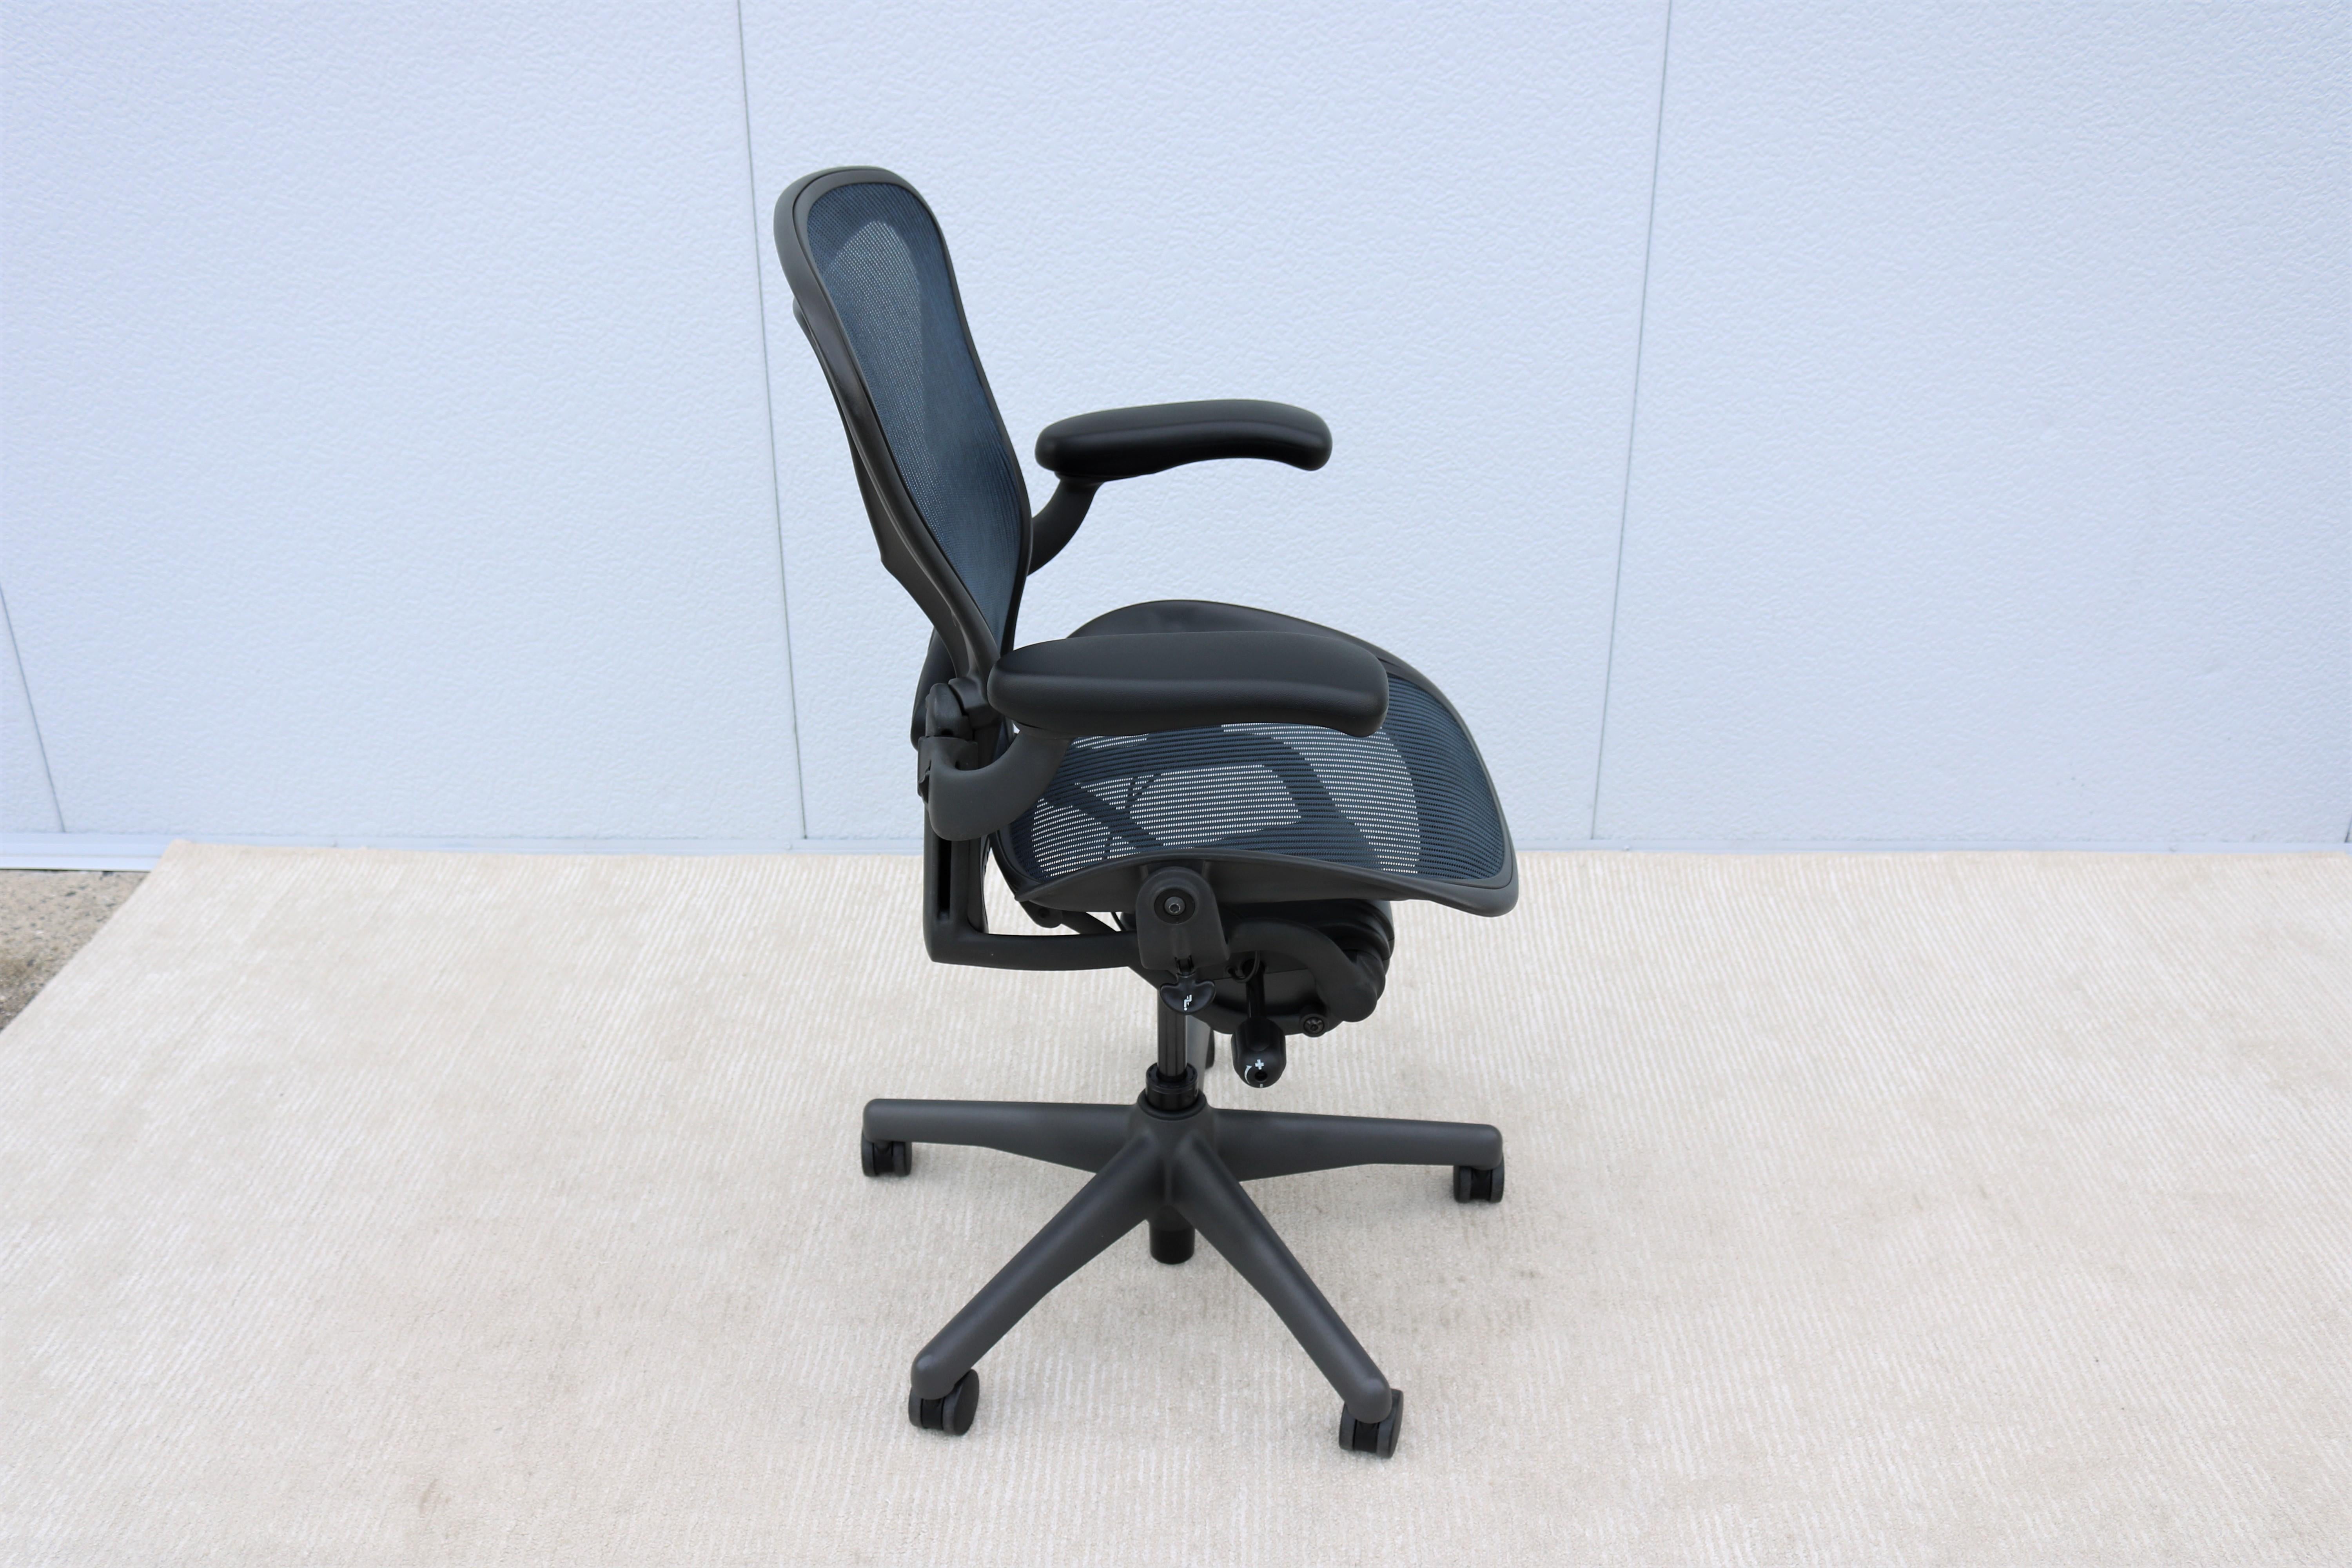 Painted Modern Herman Miller Aeron Chair Size B in Blue Mesh Fabric Fully Adjustable